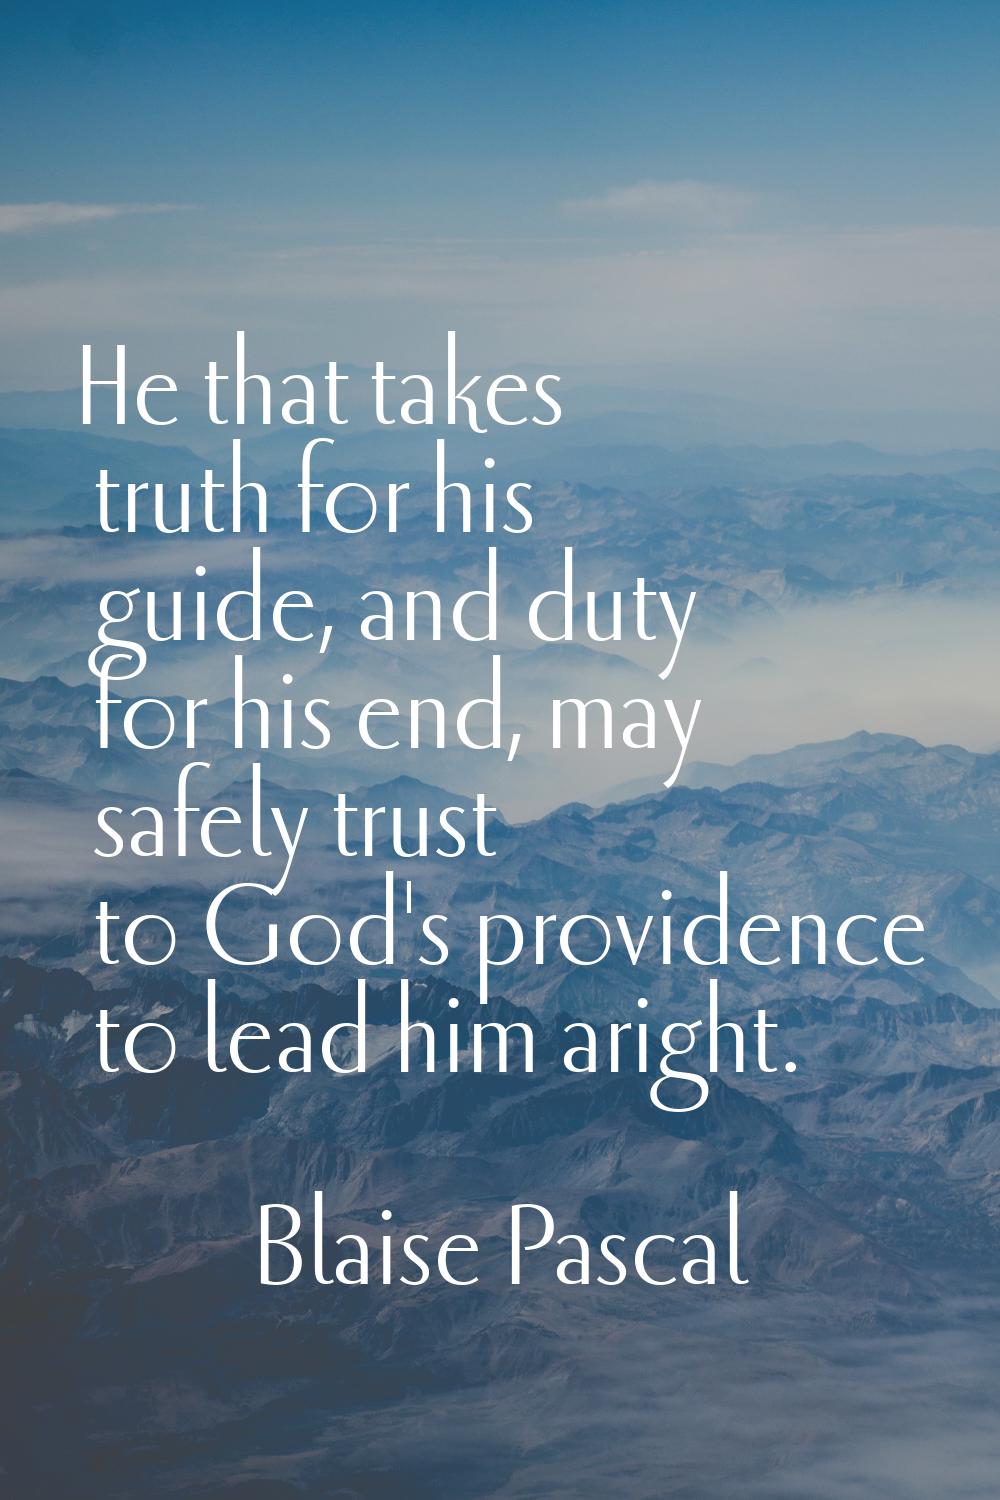 He that takes truth for his guide, and duty for his end, may safely trust to God's providence to le